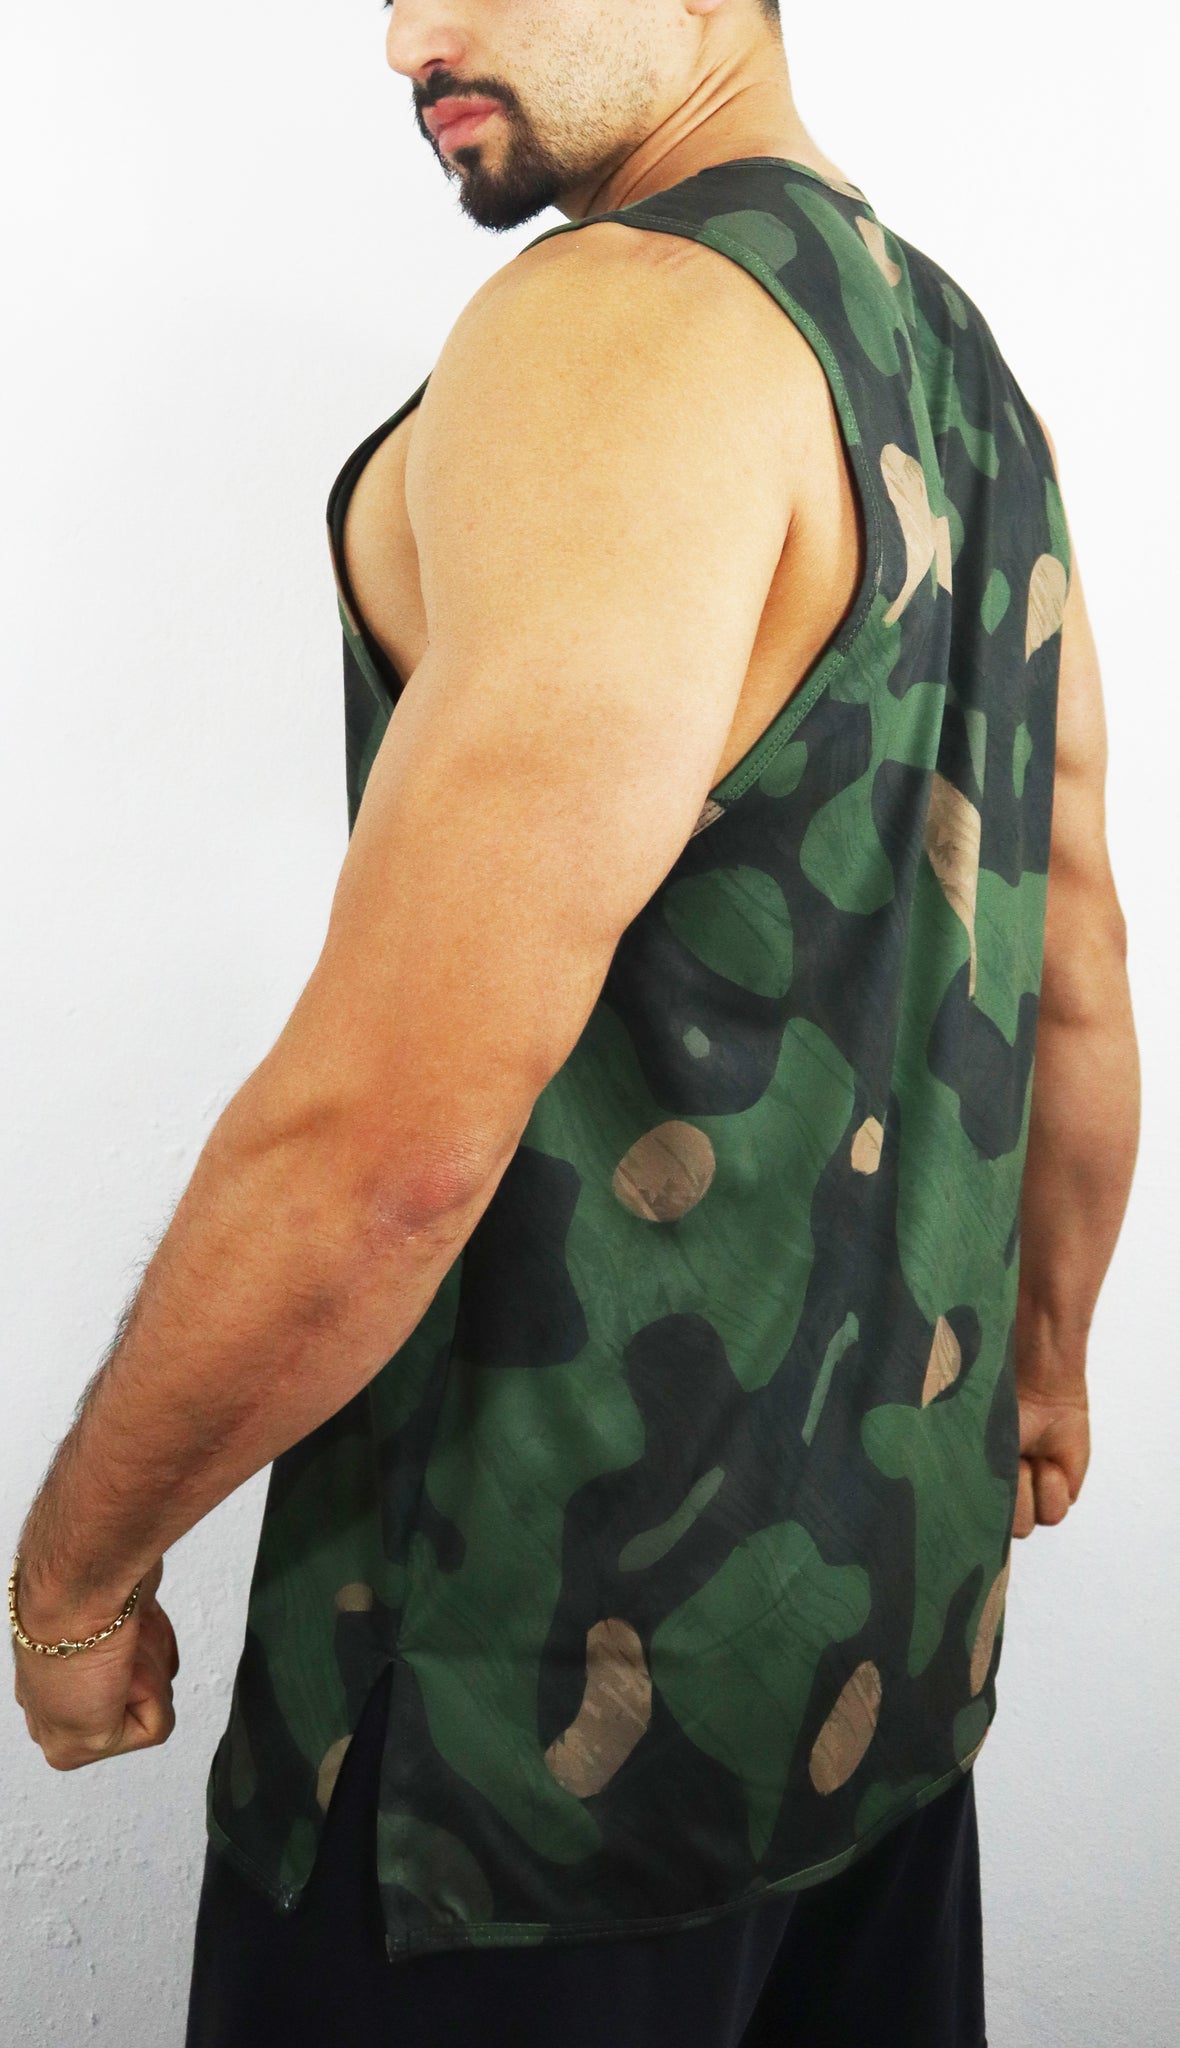 Tank Top · Cammo Strong